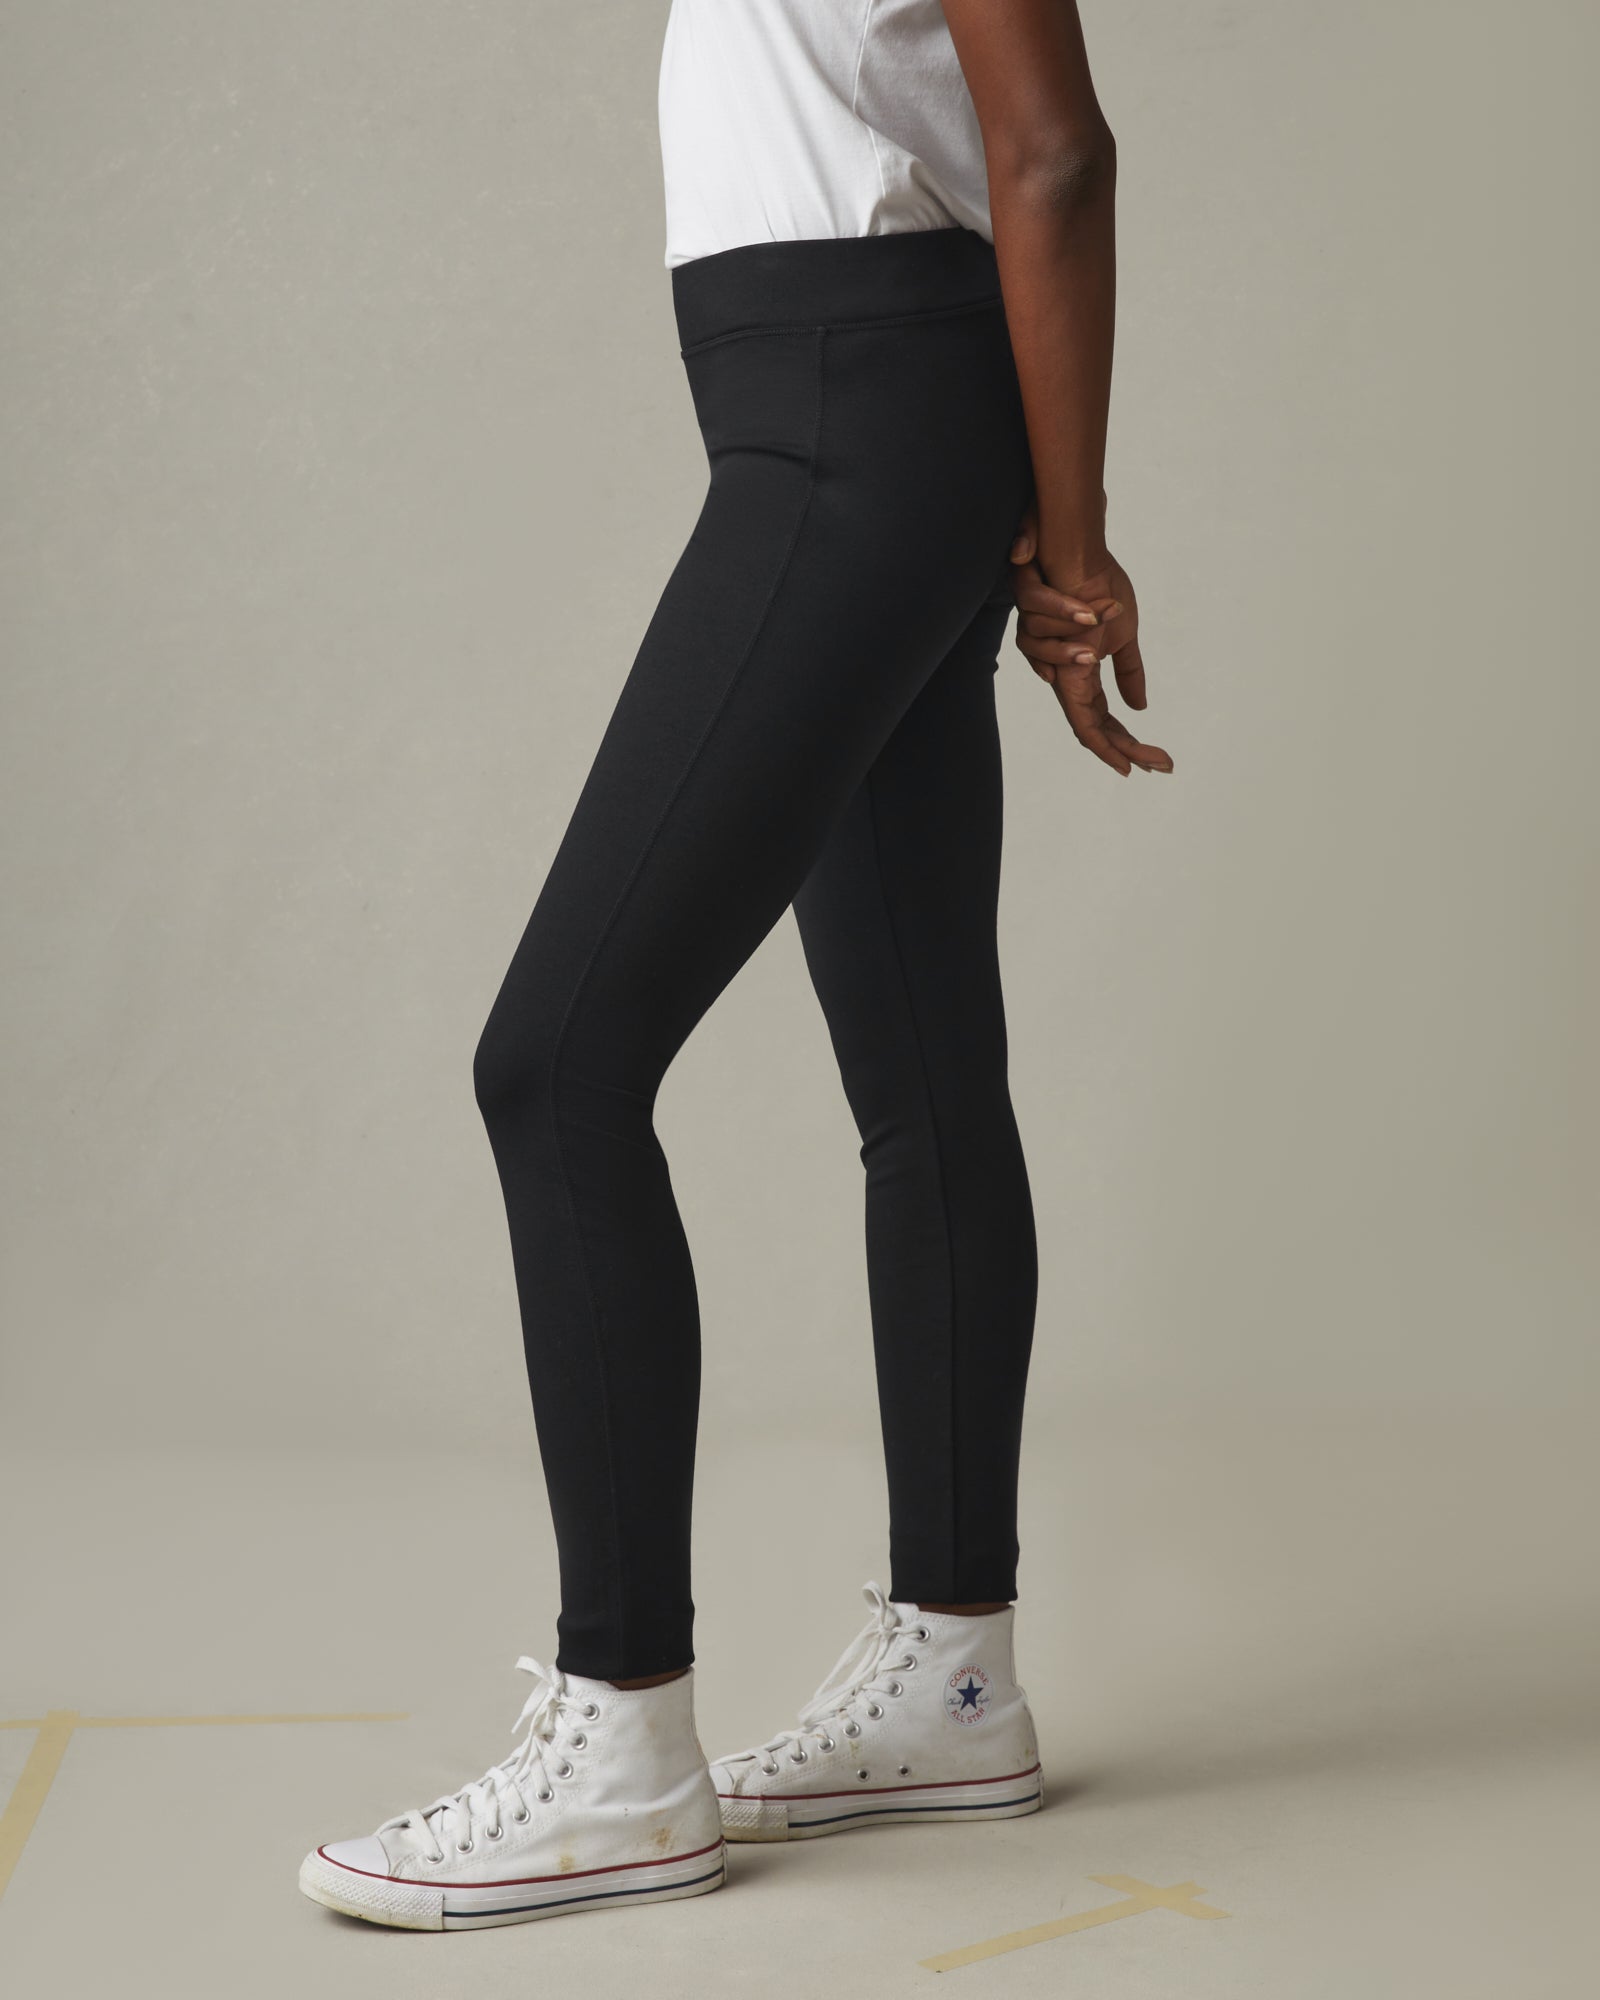 Nike Mother Nature One Tight Legging in Black